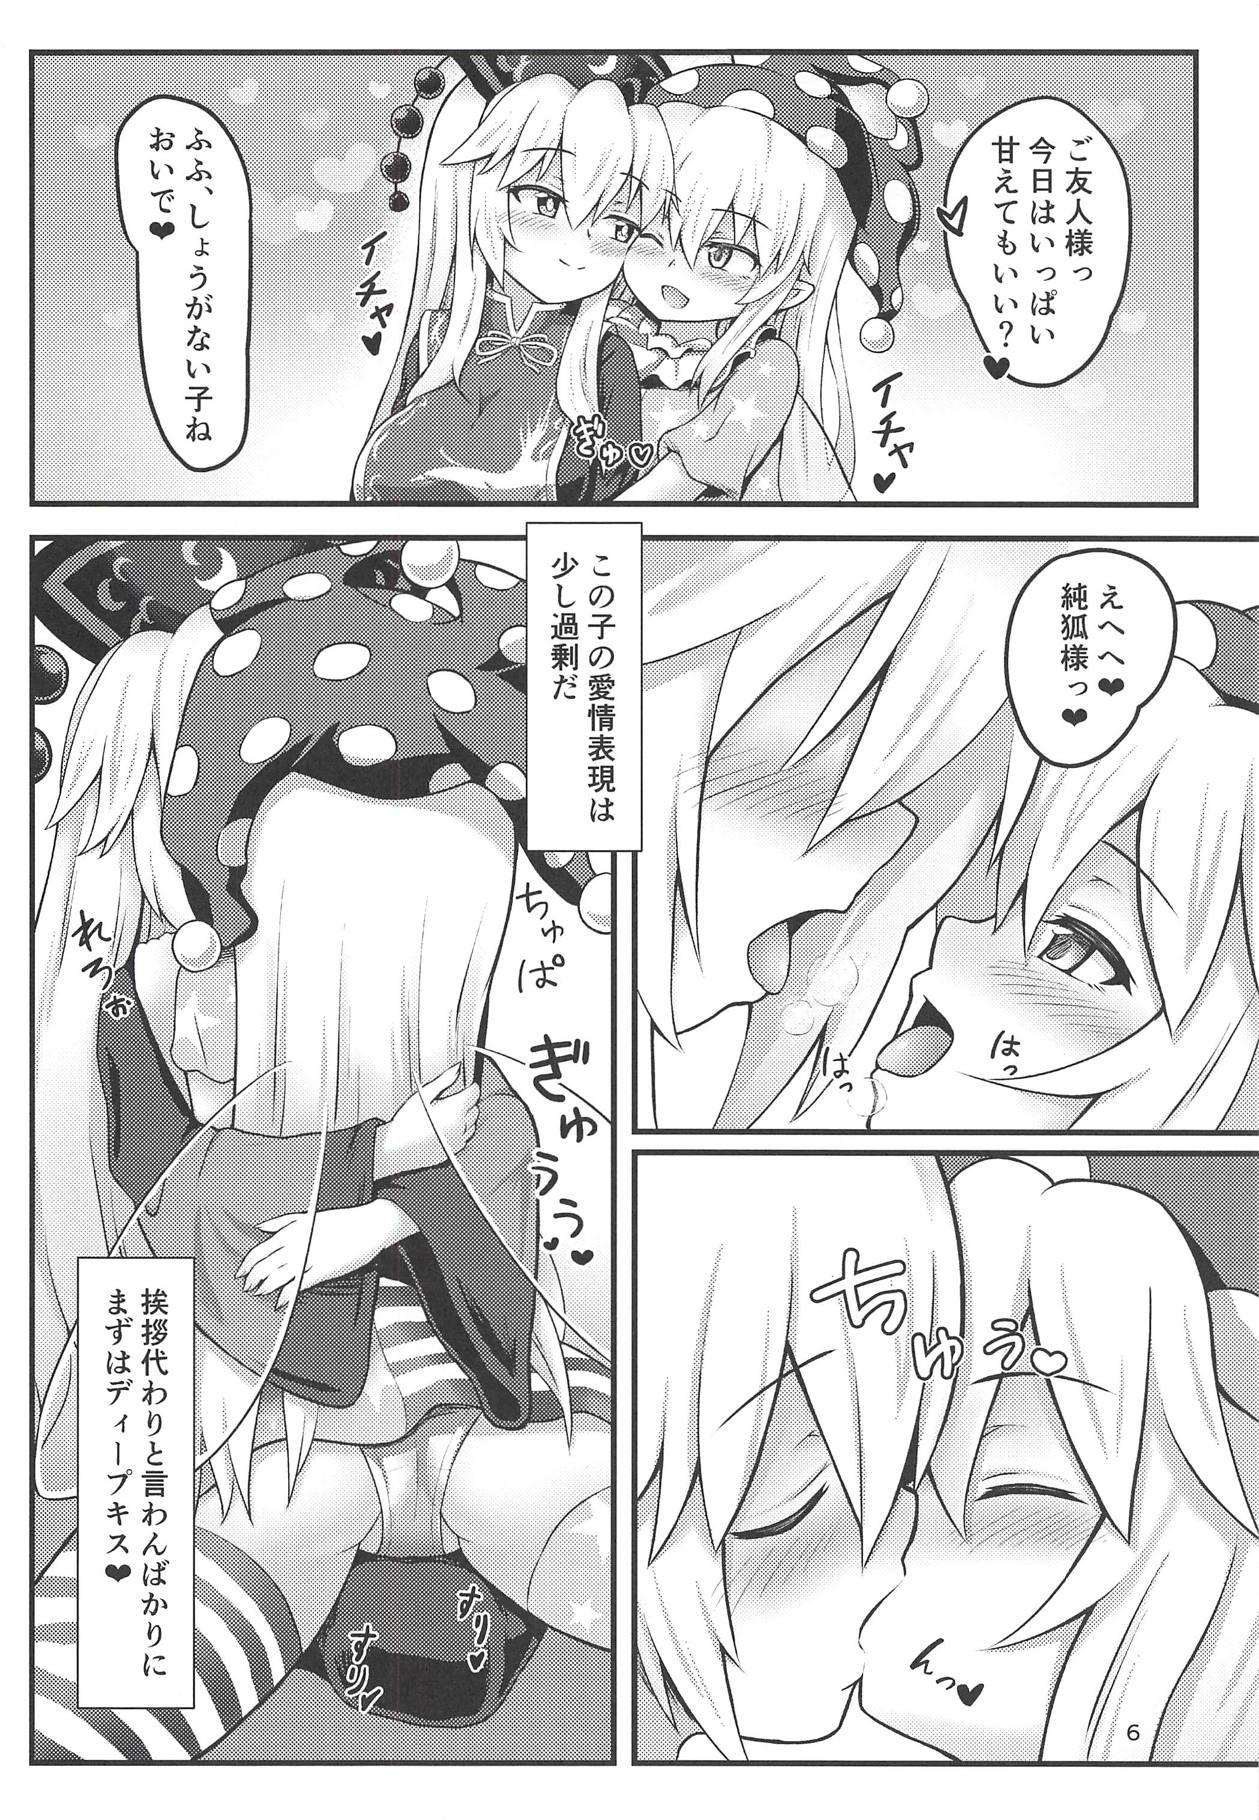 Boquete Amaetagari no Clopie-chan! - Touhou project Young Old - Page 3